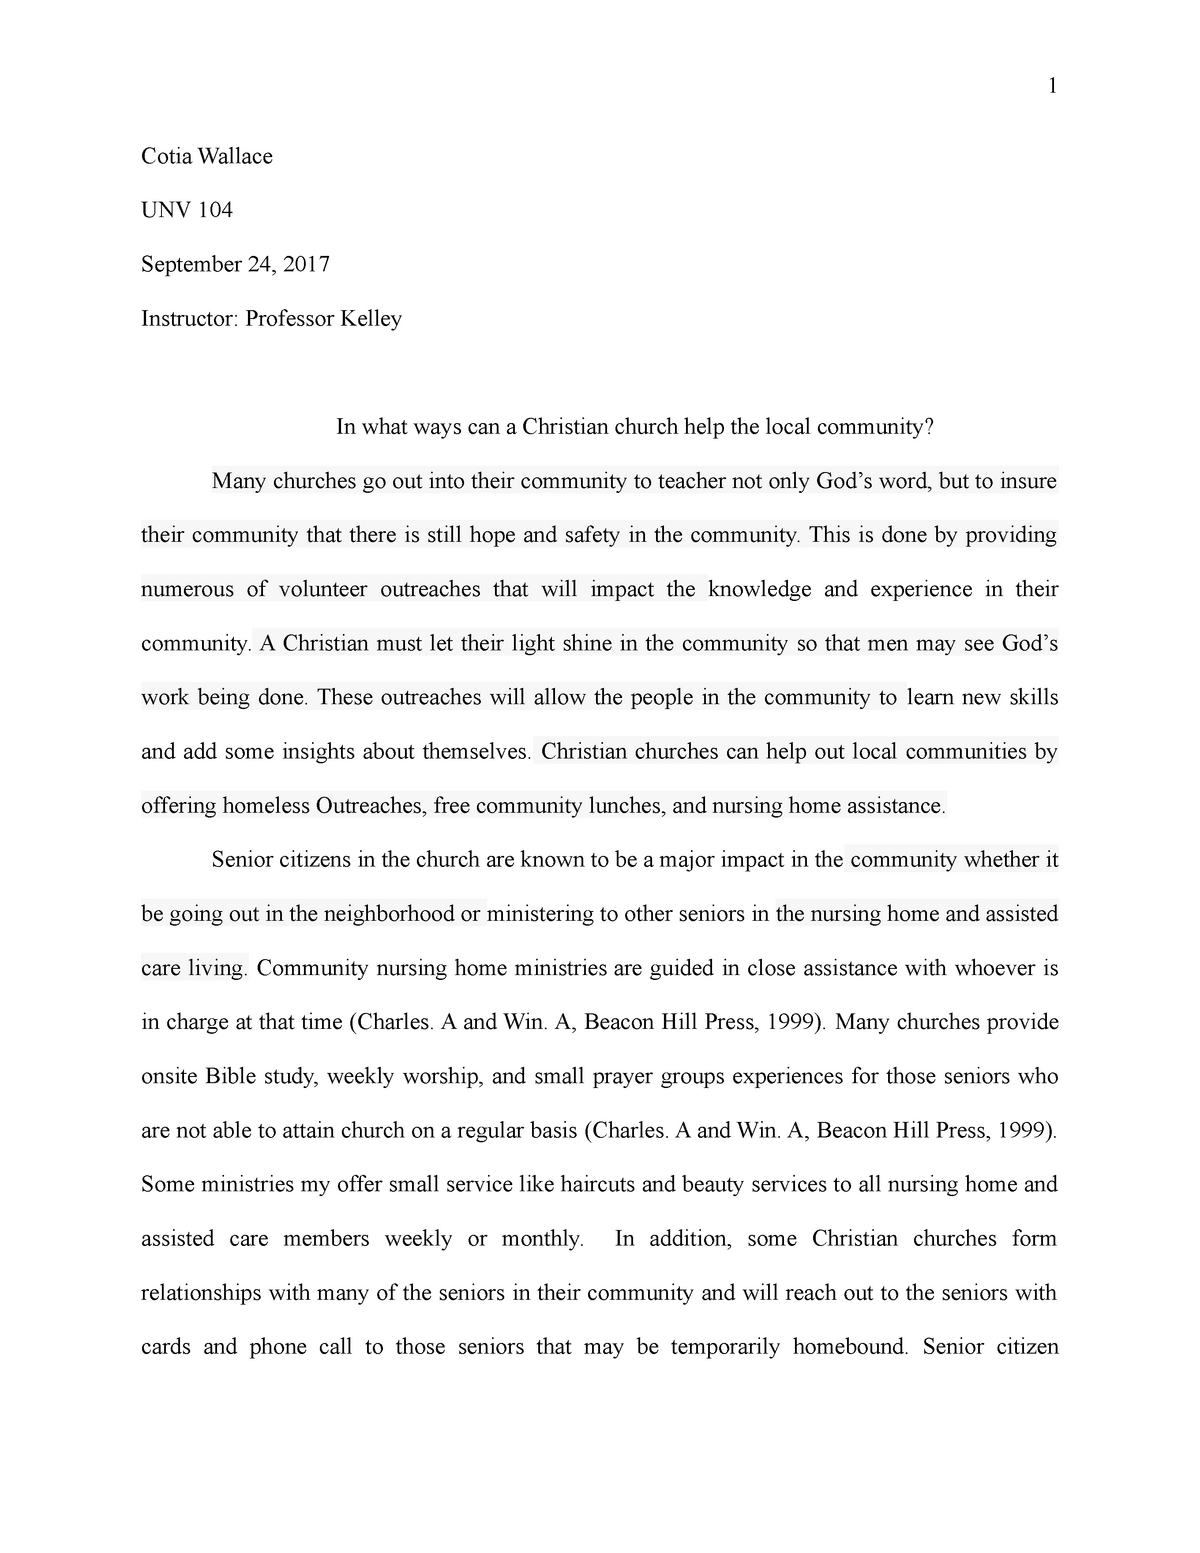 First Draft Expository Essay Inwhatwayscana